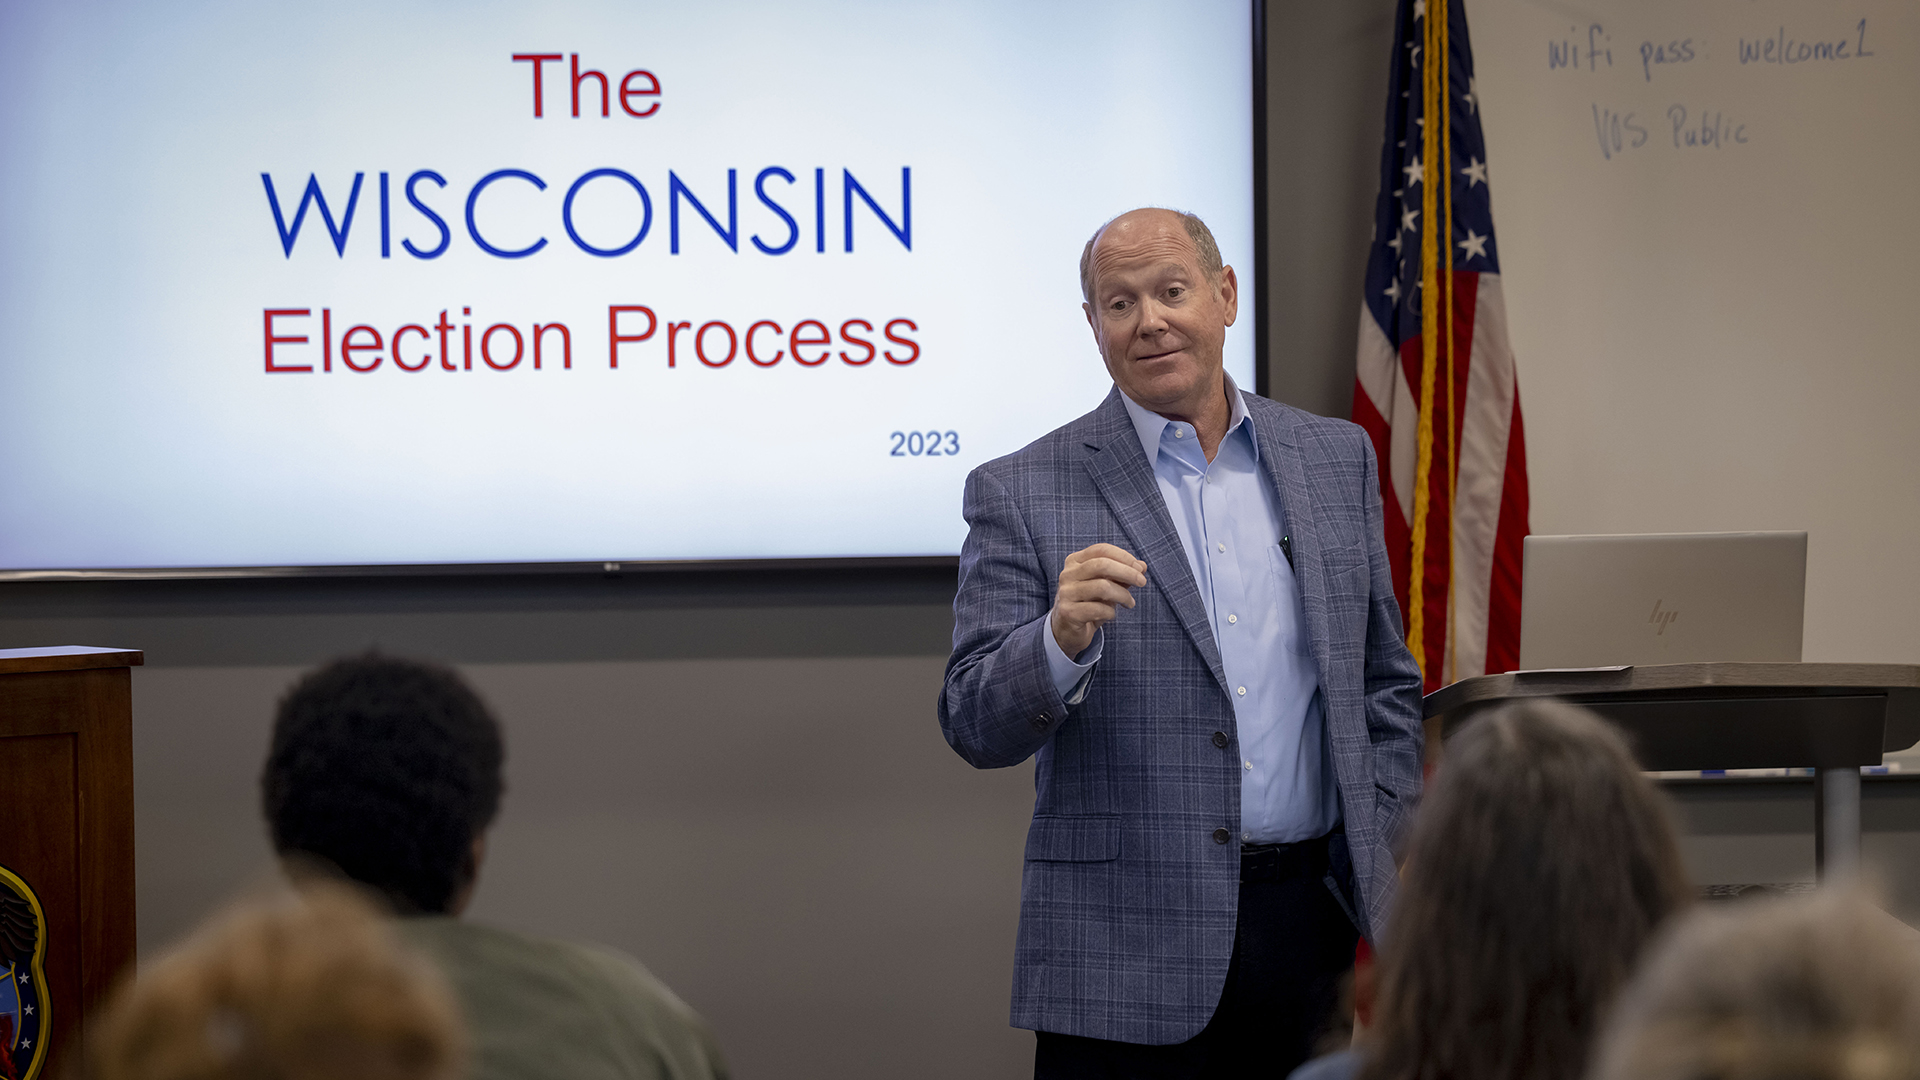 Reid Ribble stands and speaks to a group of people facing him, with the backs of several out-of-focus heads in the foreground, in a room with a wall-mounted monitor showing the words "The Wisconsin Election Process 2023," a U.S. flag, and a whiteboard.